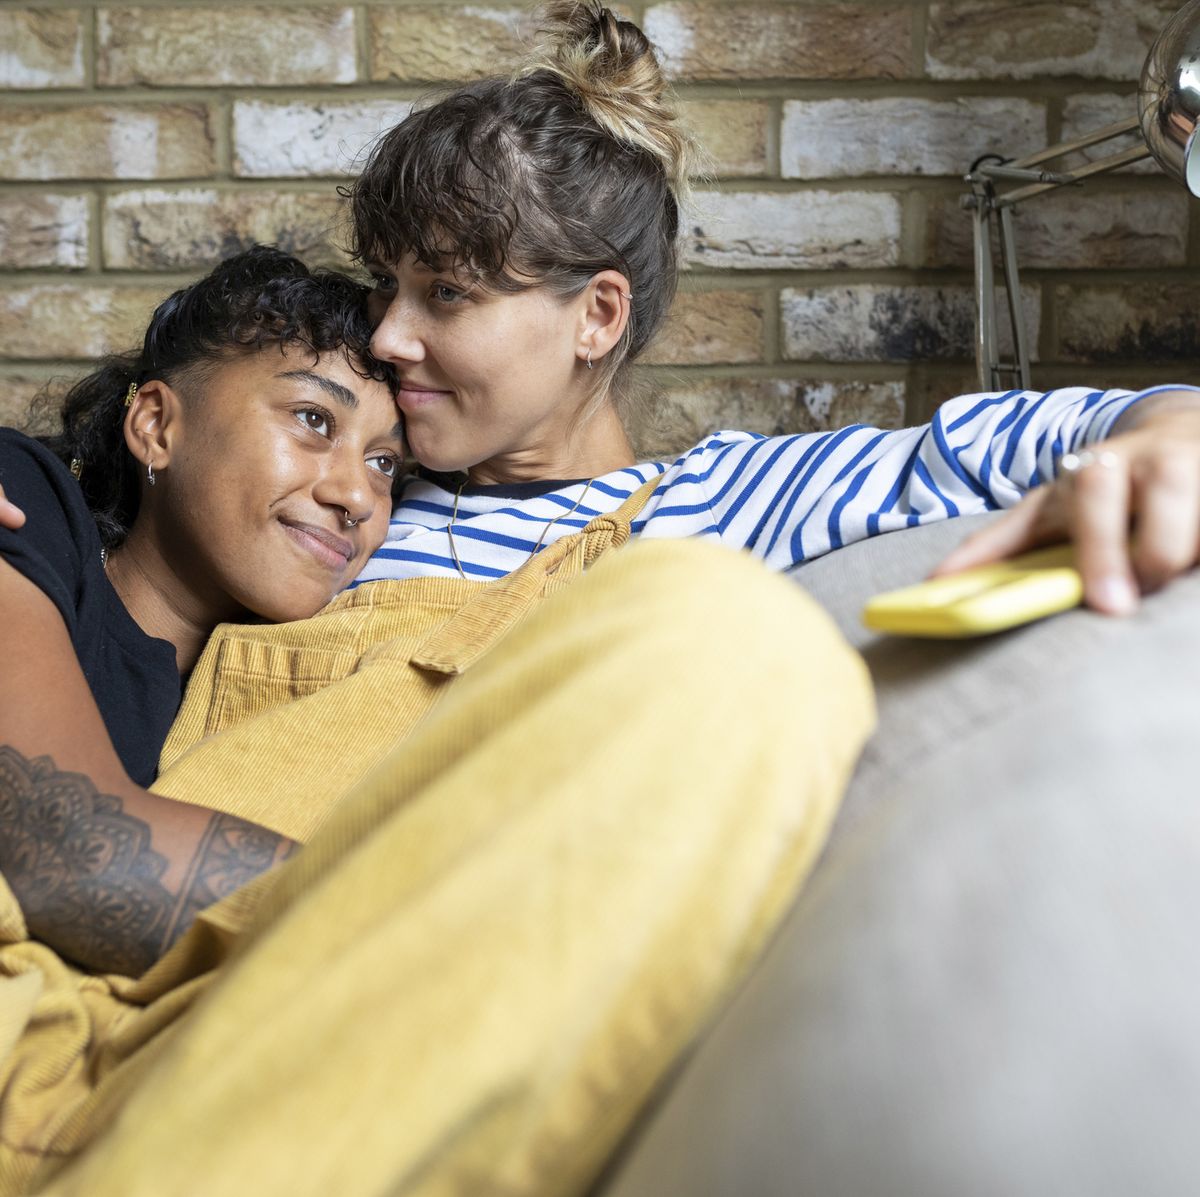 Celebrity Black Lesbian Sex - Am I a lesbian? How to know if you're a lesbian